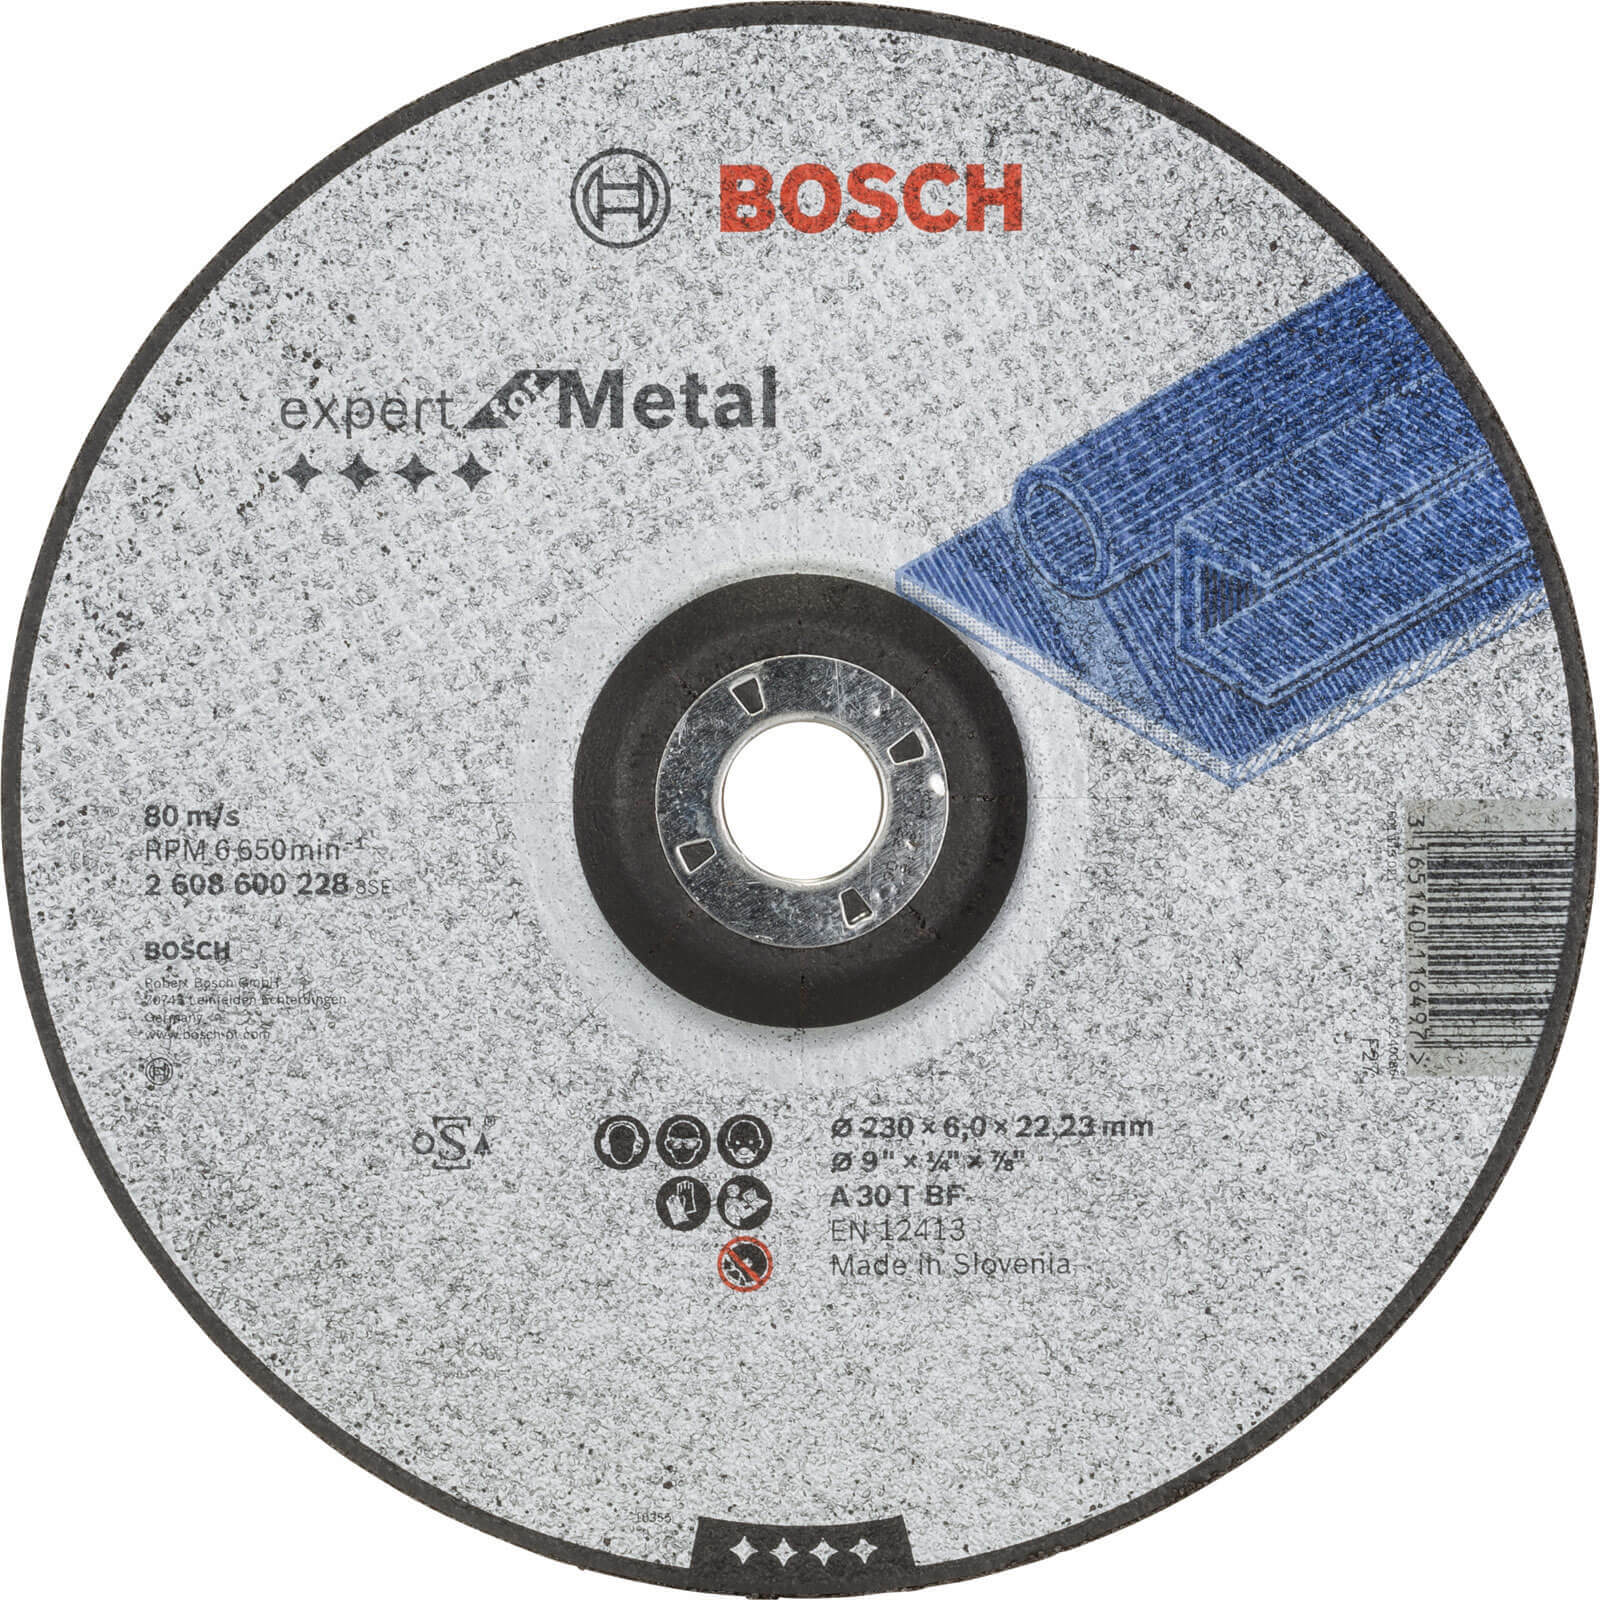 Photos - Cutting Disc Bosch A30T BF Drepressed Centre Metal Grinding Disc 230mm 2608600228 